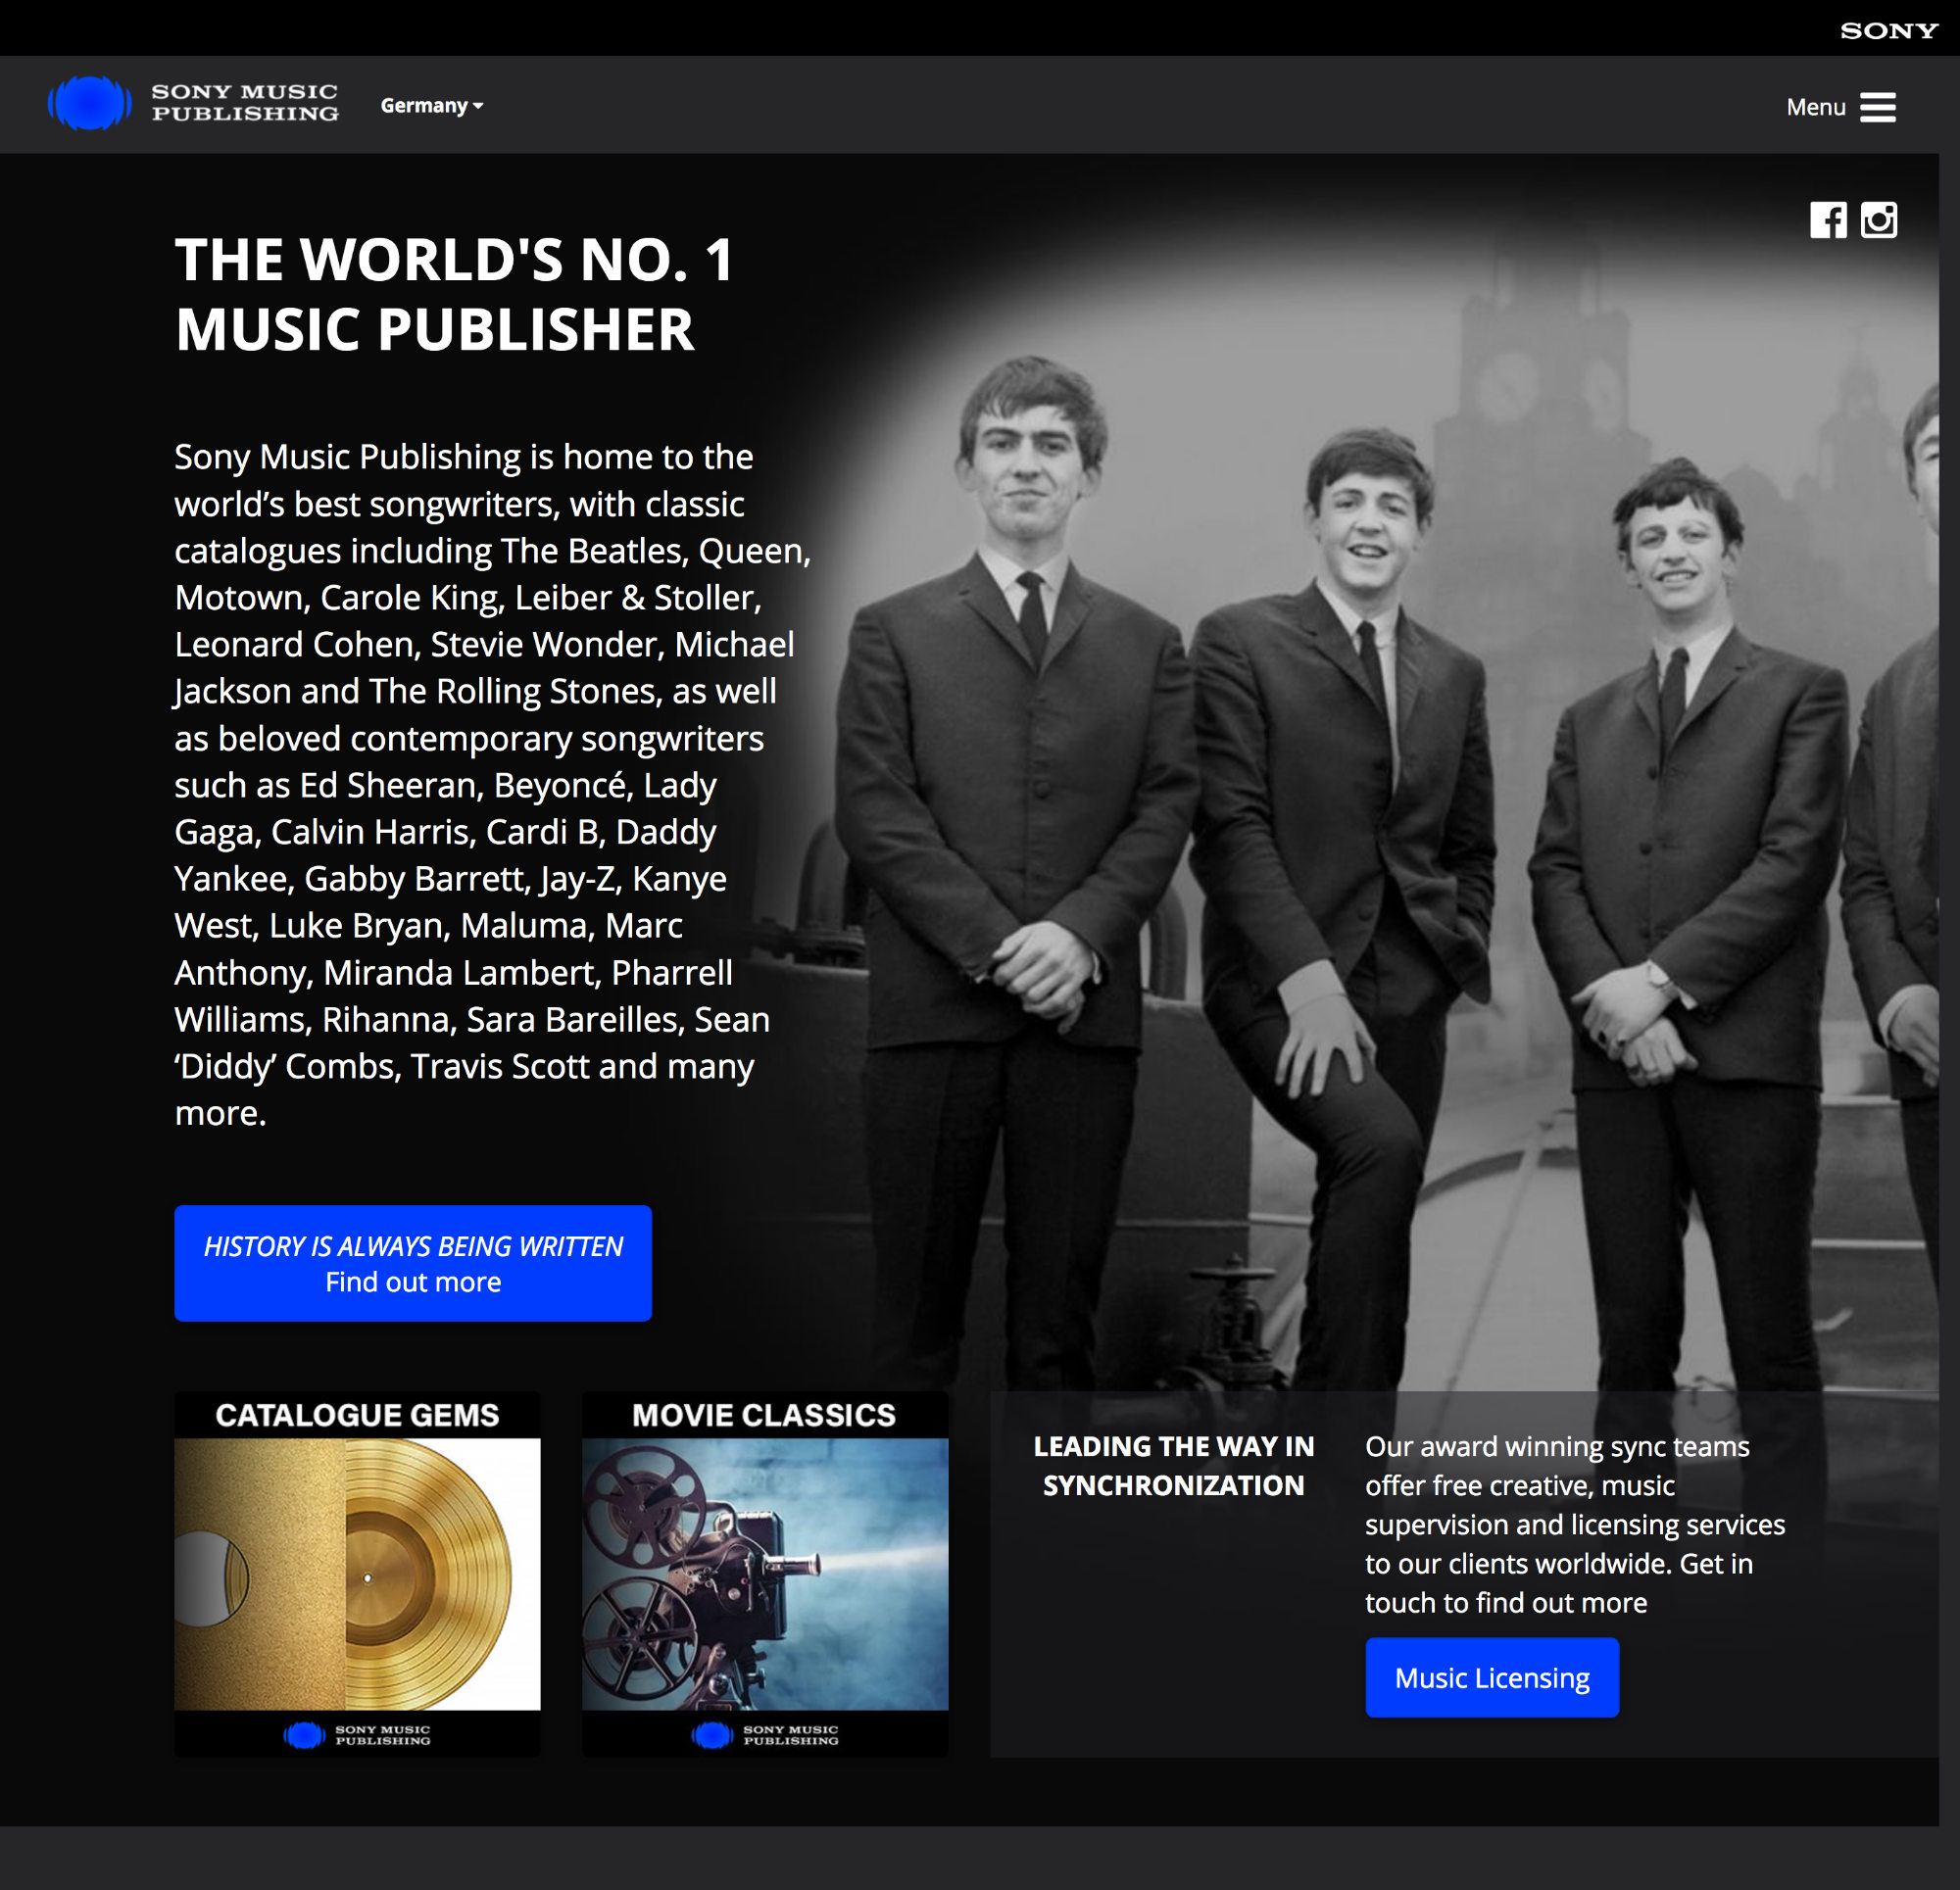 Sony Music Publising Website, Quelle: Sony Music Publishing